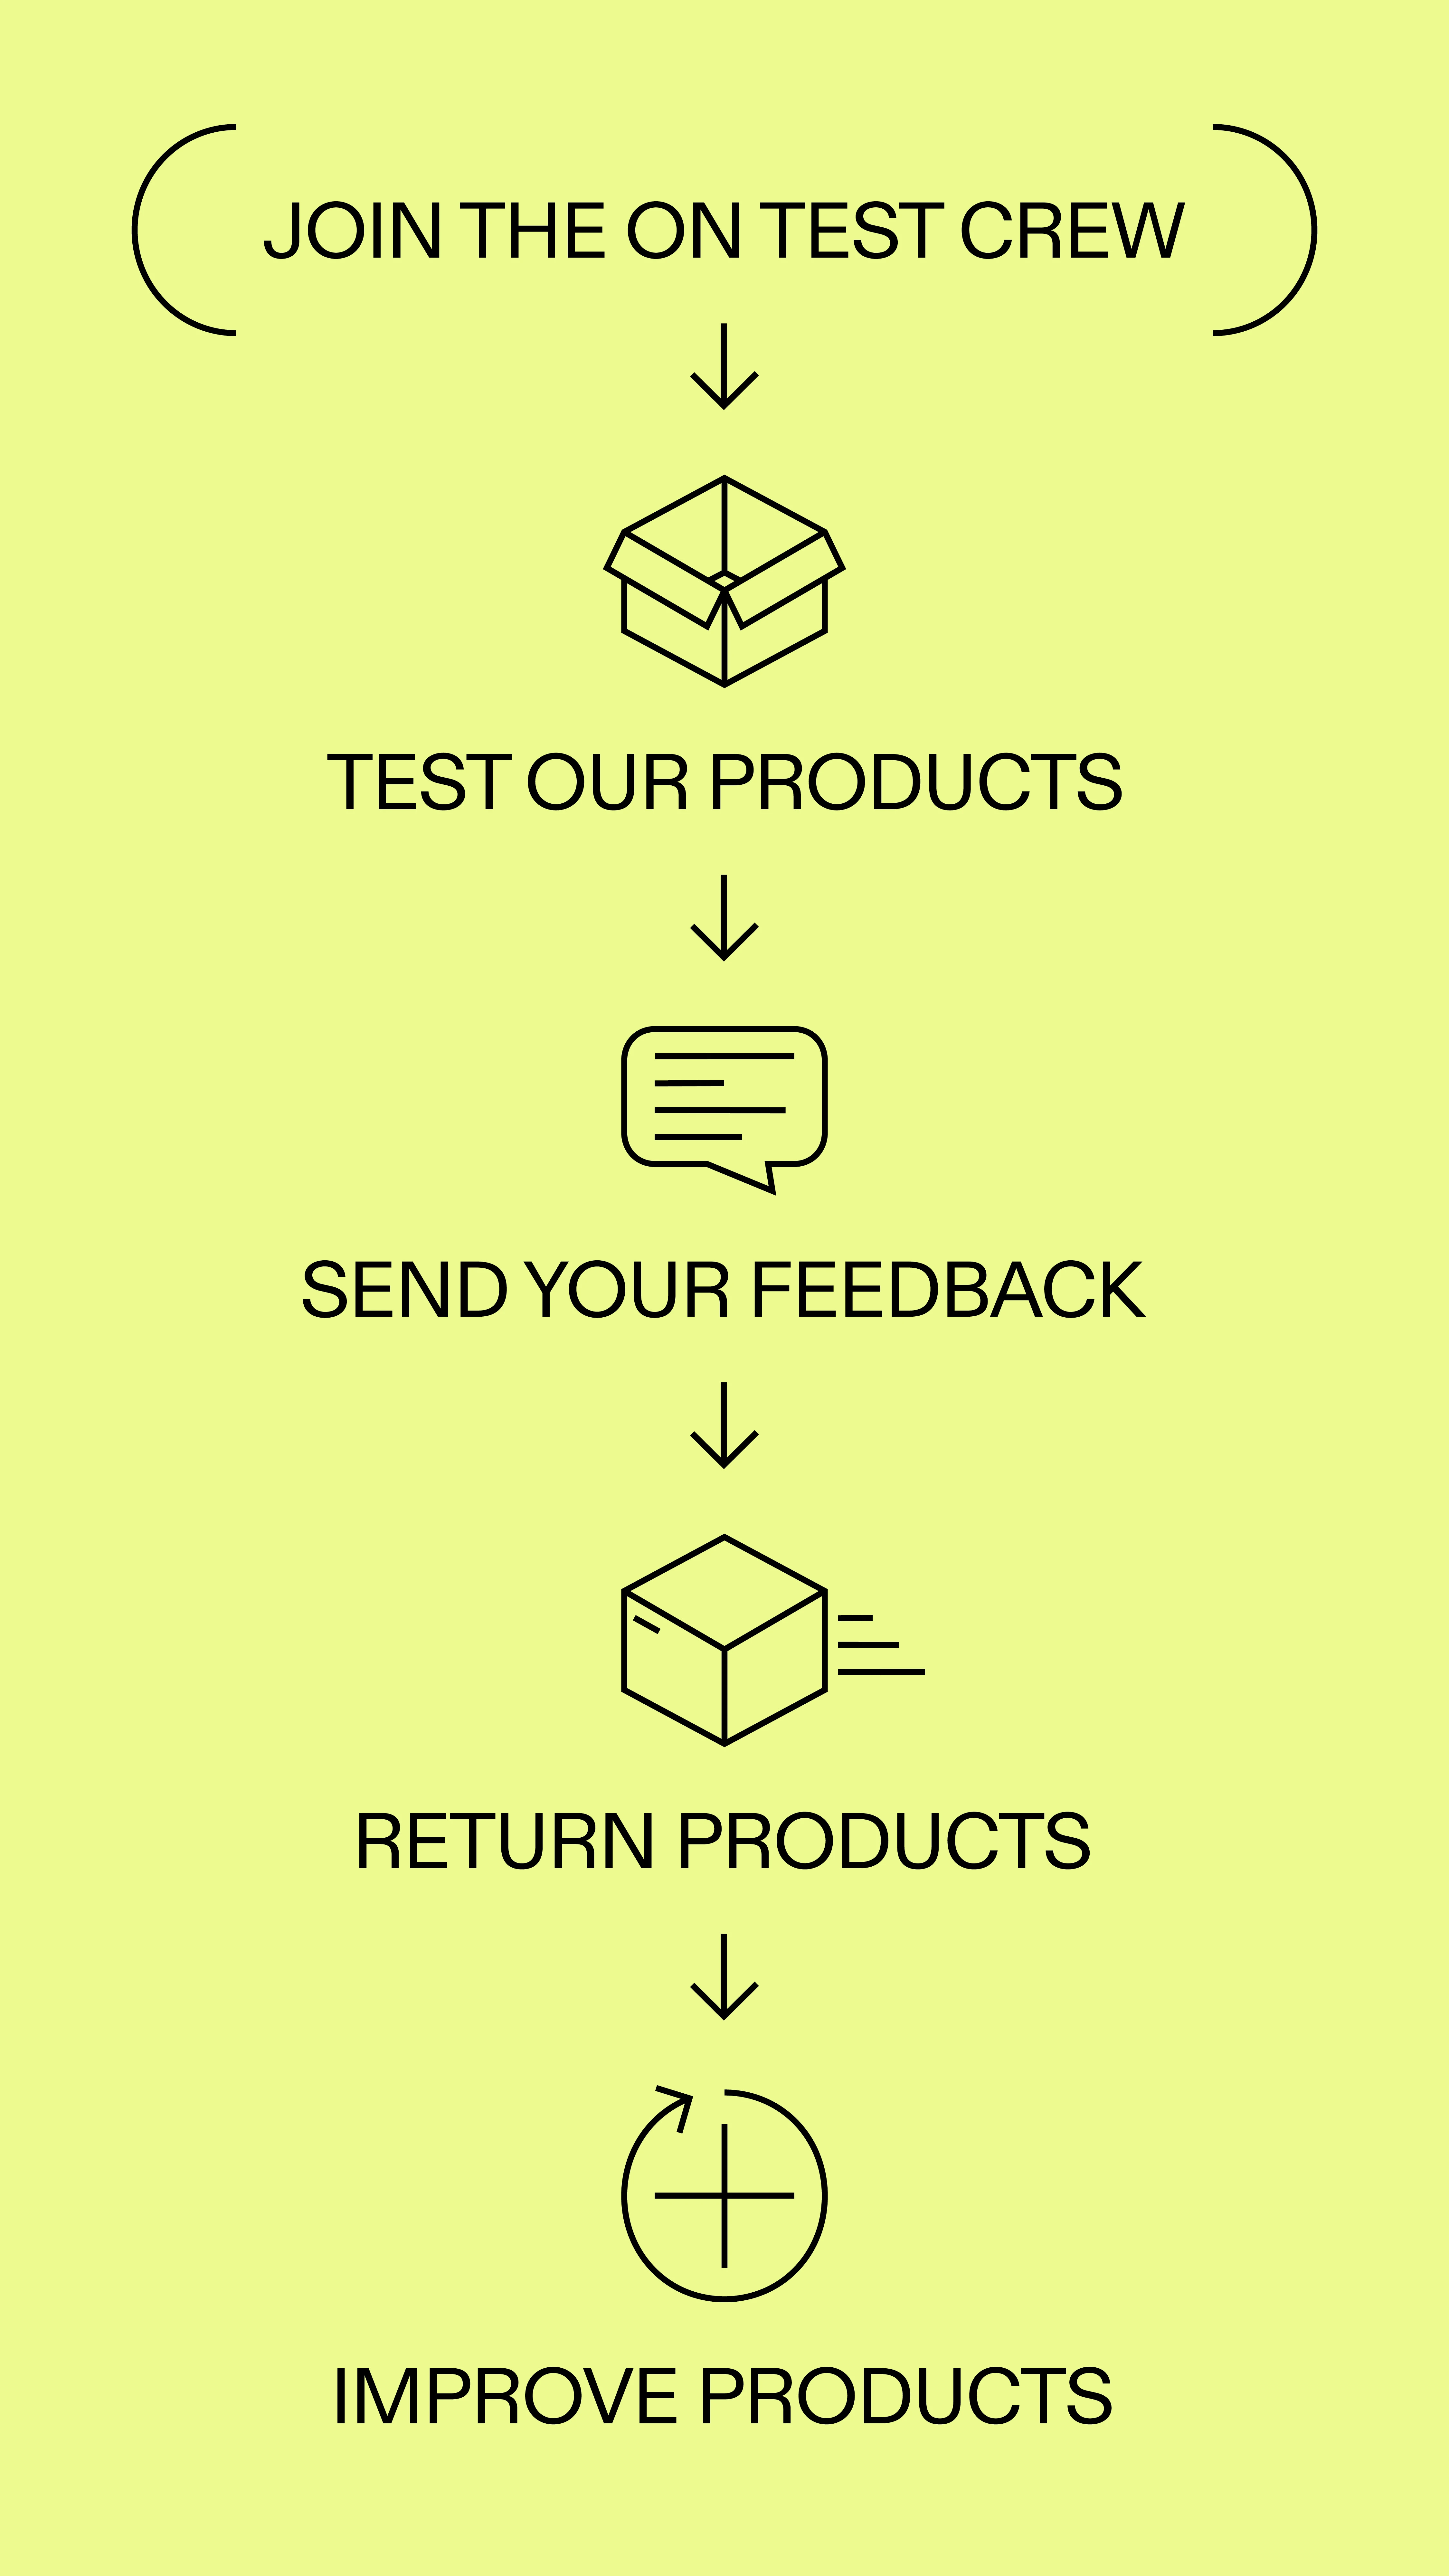 Test our products